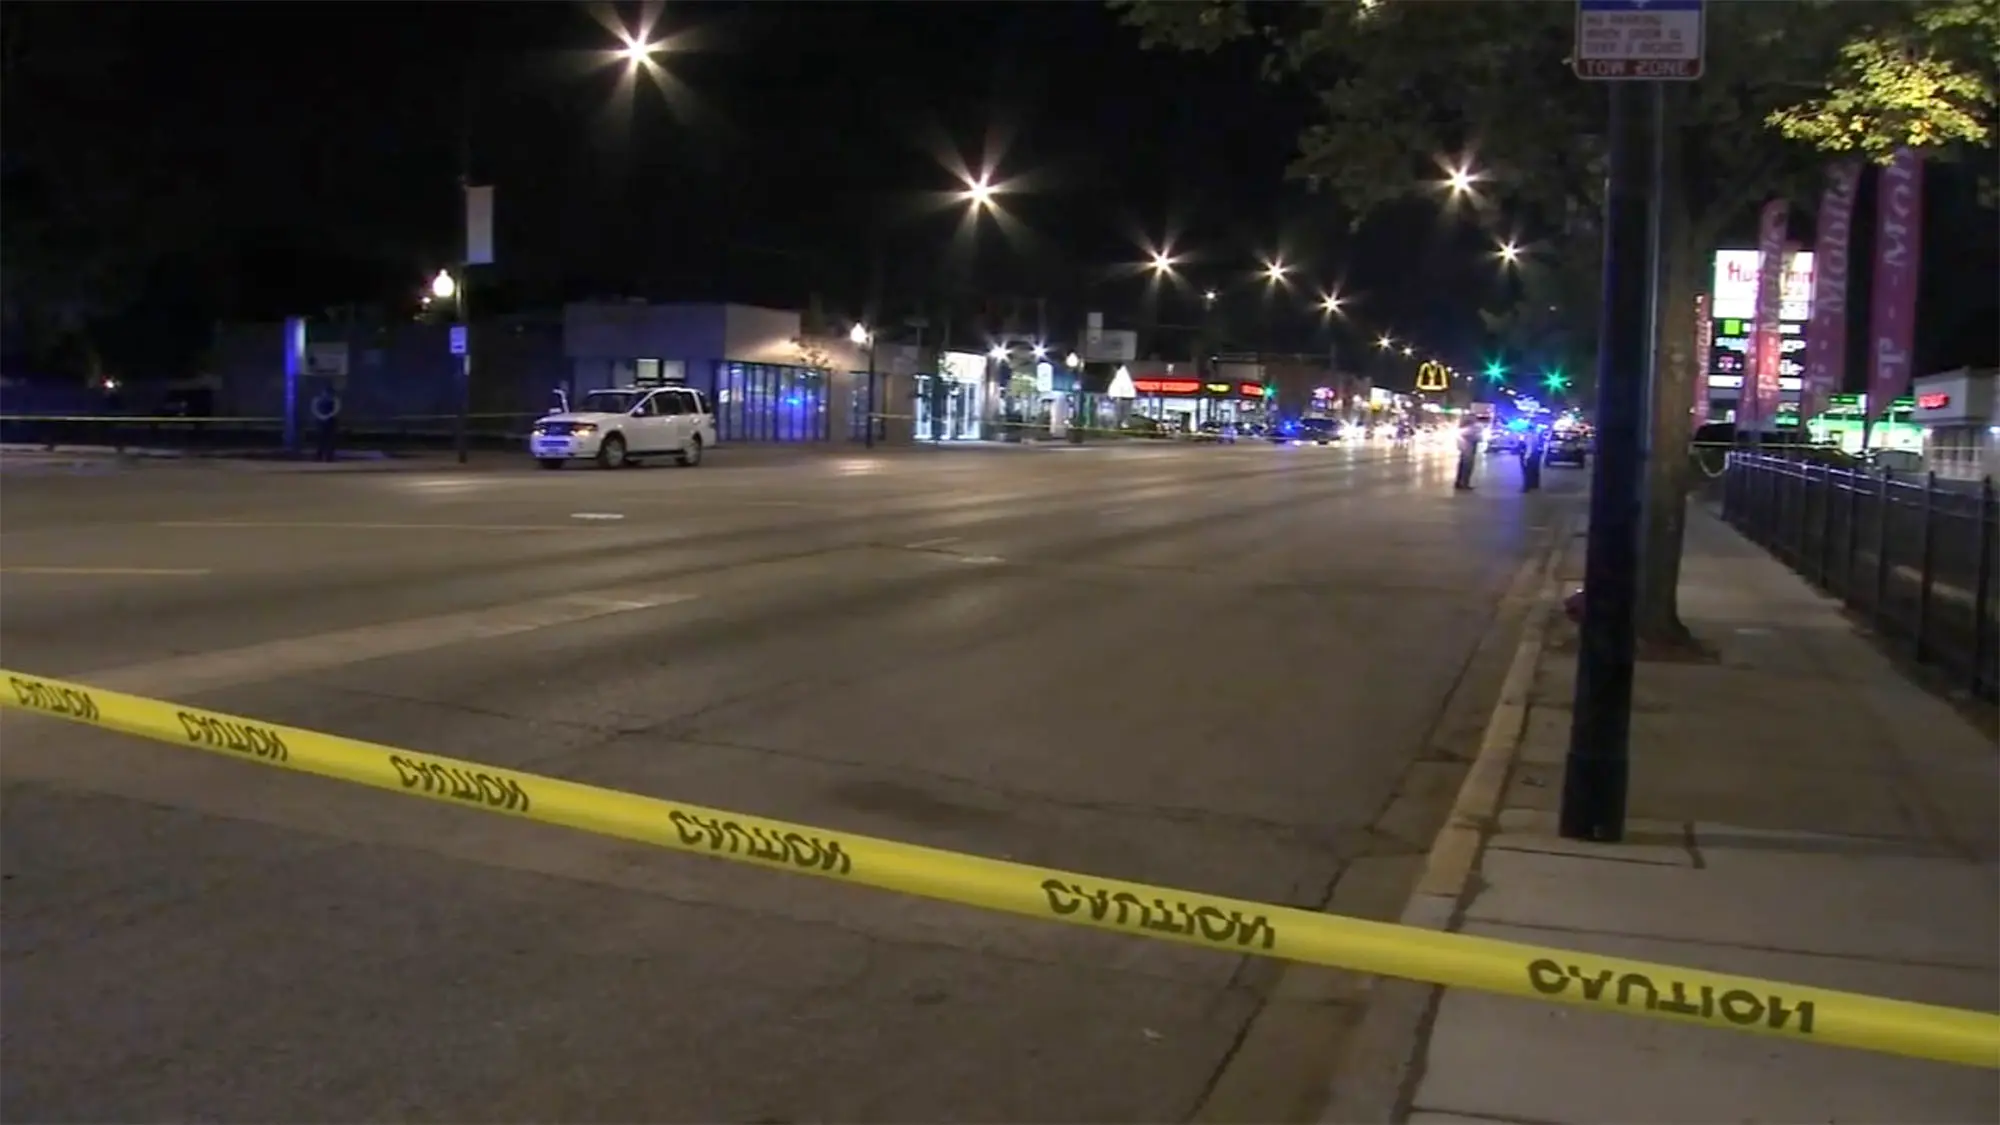 HORROR: 3-Year-Old Boy Fatally Shot in Road Rage Confrontation in Chicago’s West Lawn Neighborhood